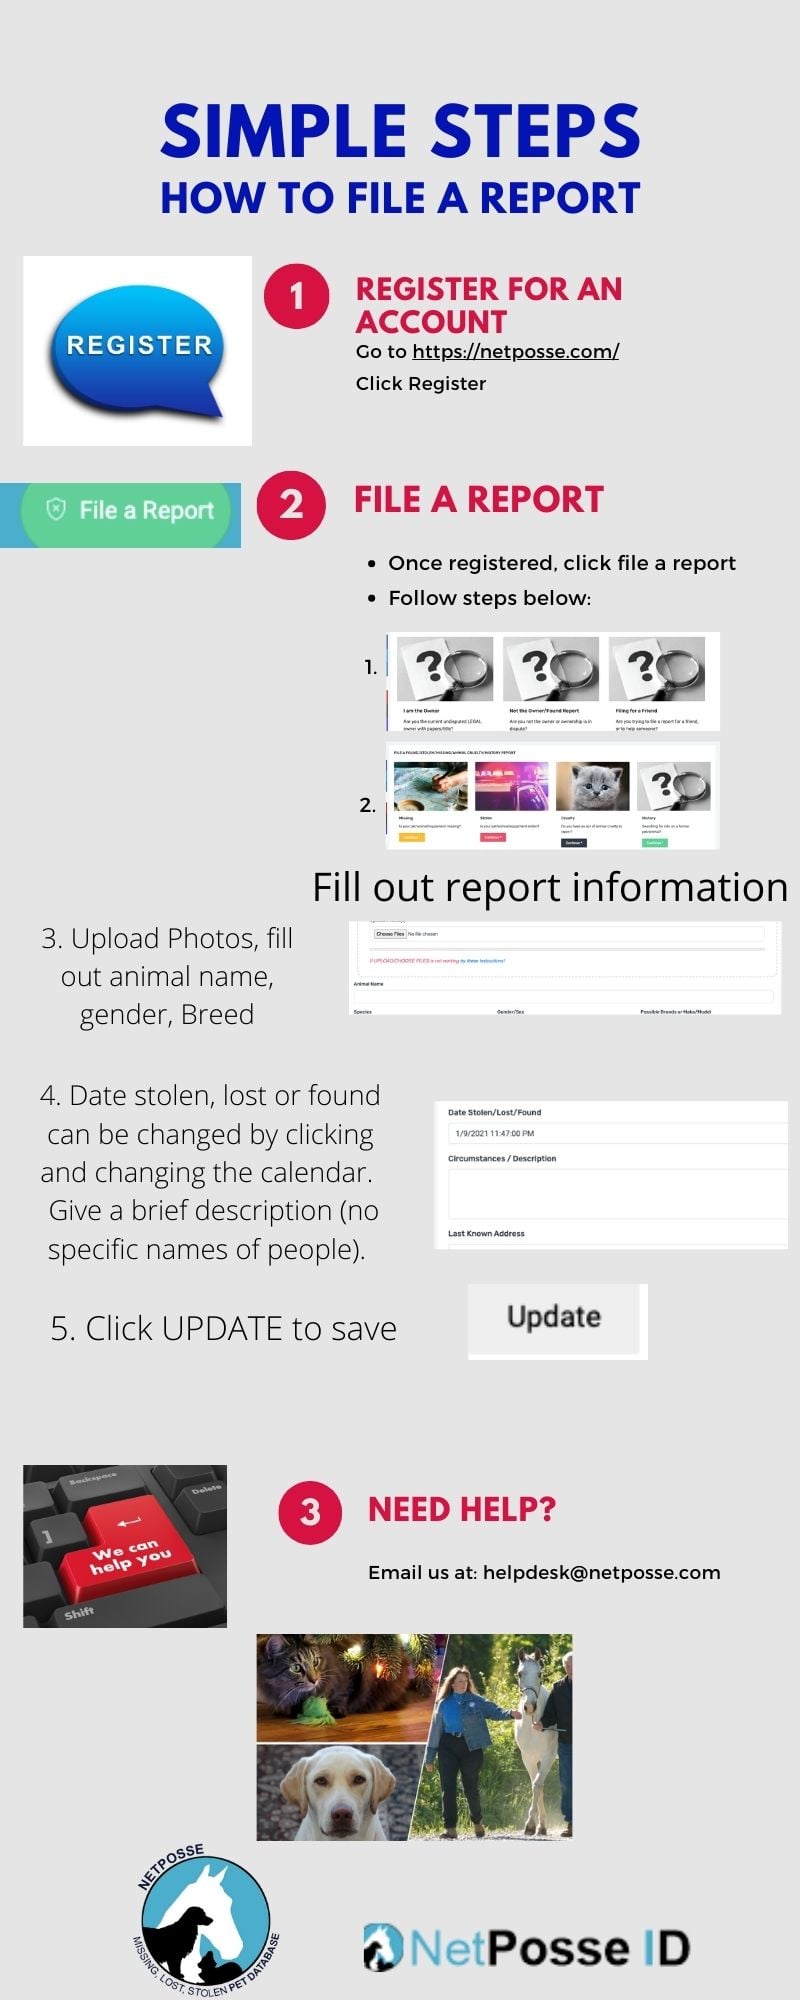 store/news/3727/How To File A Report_phone.jpg